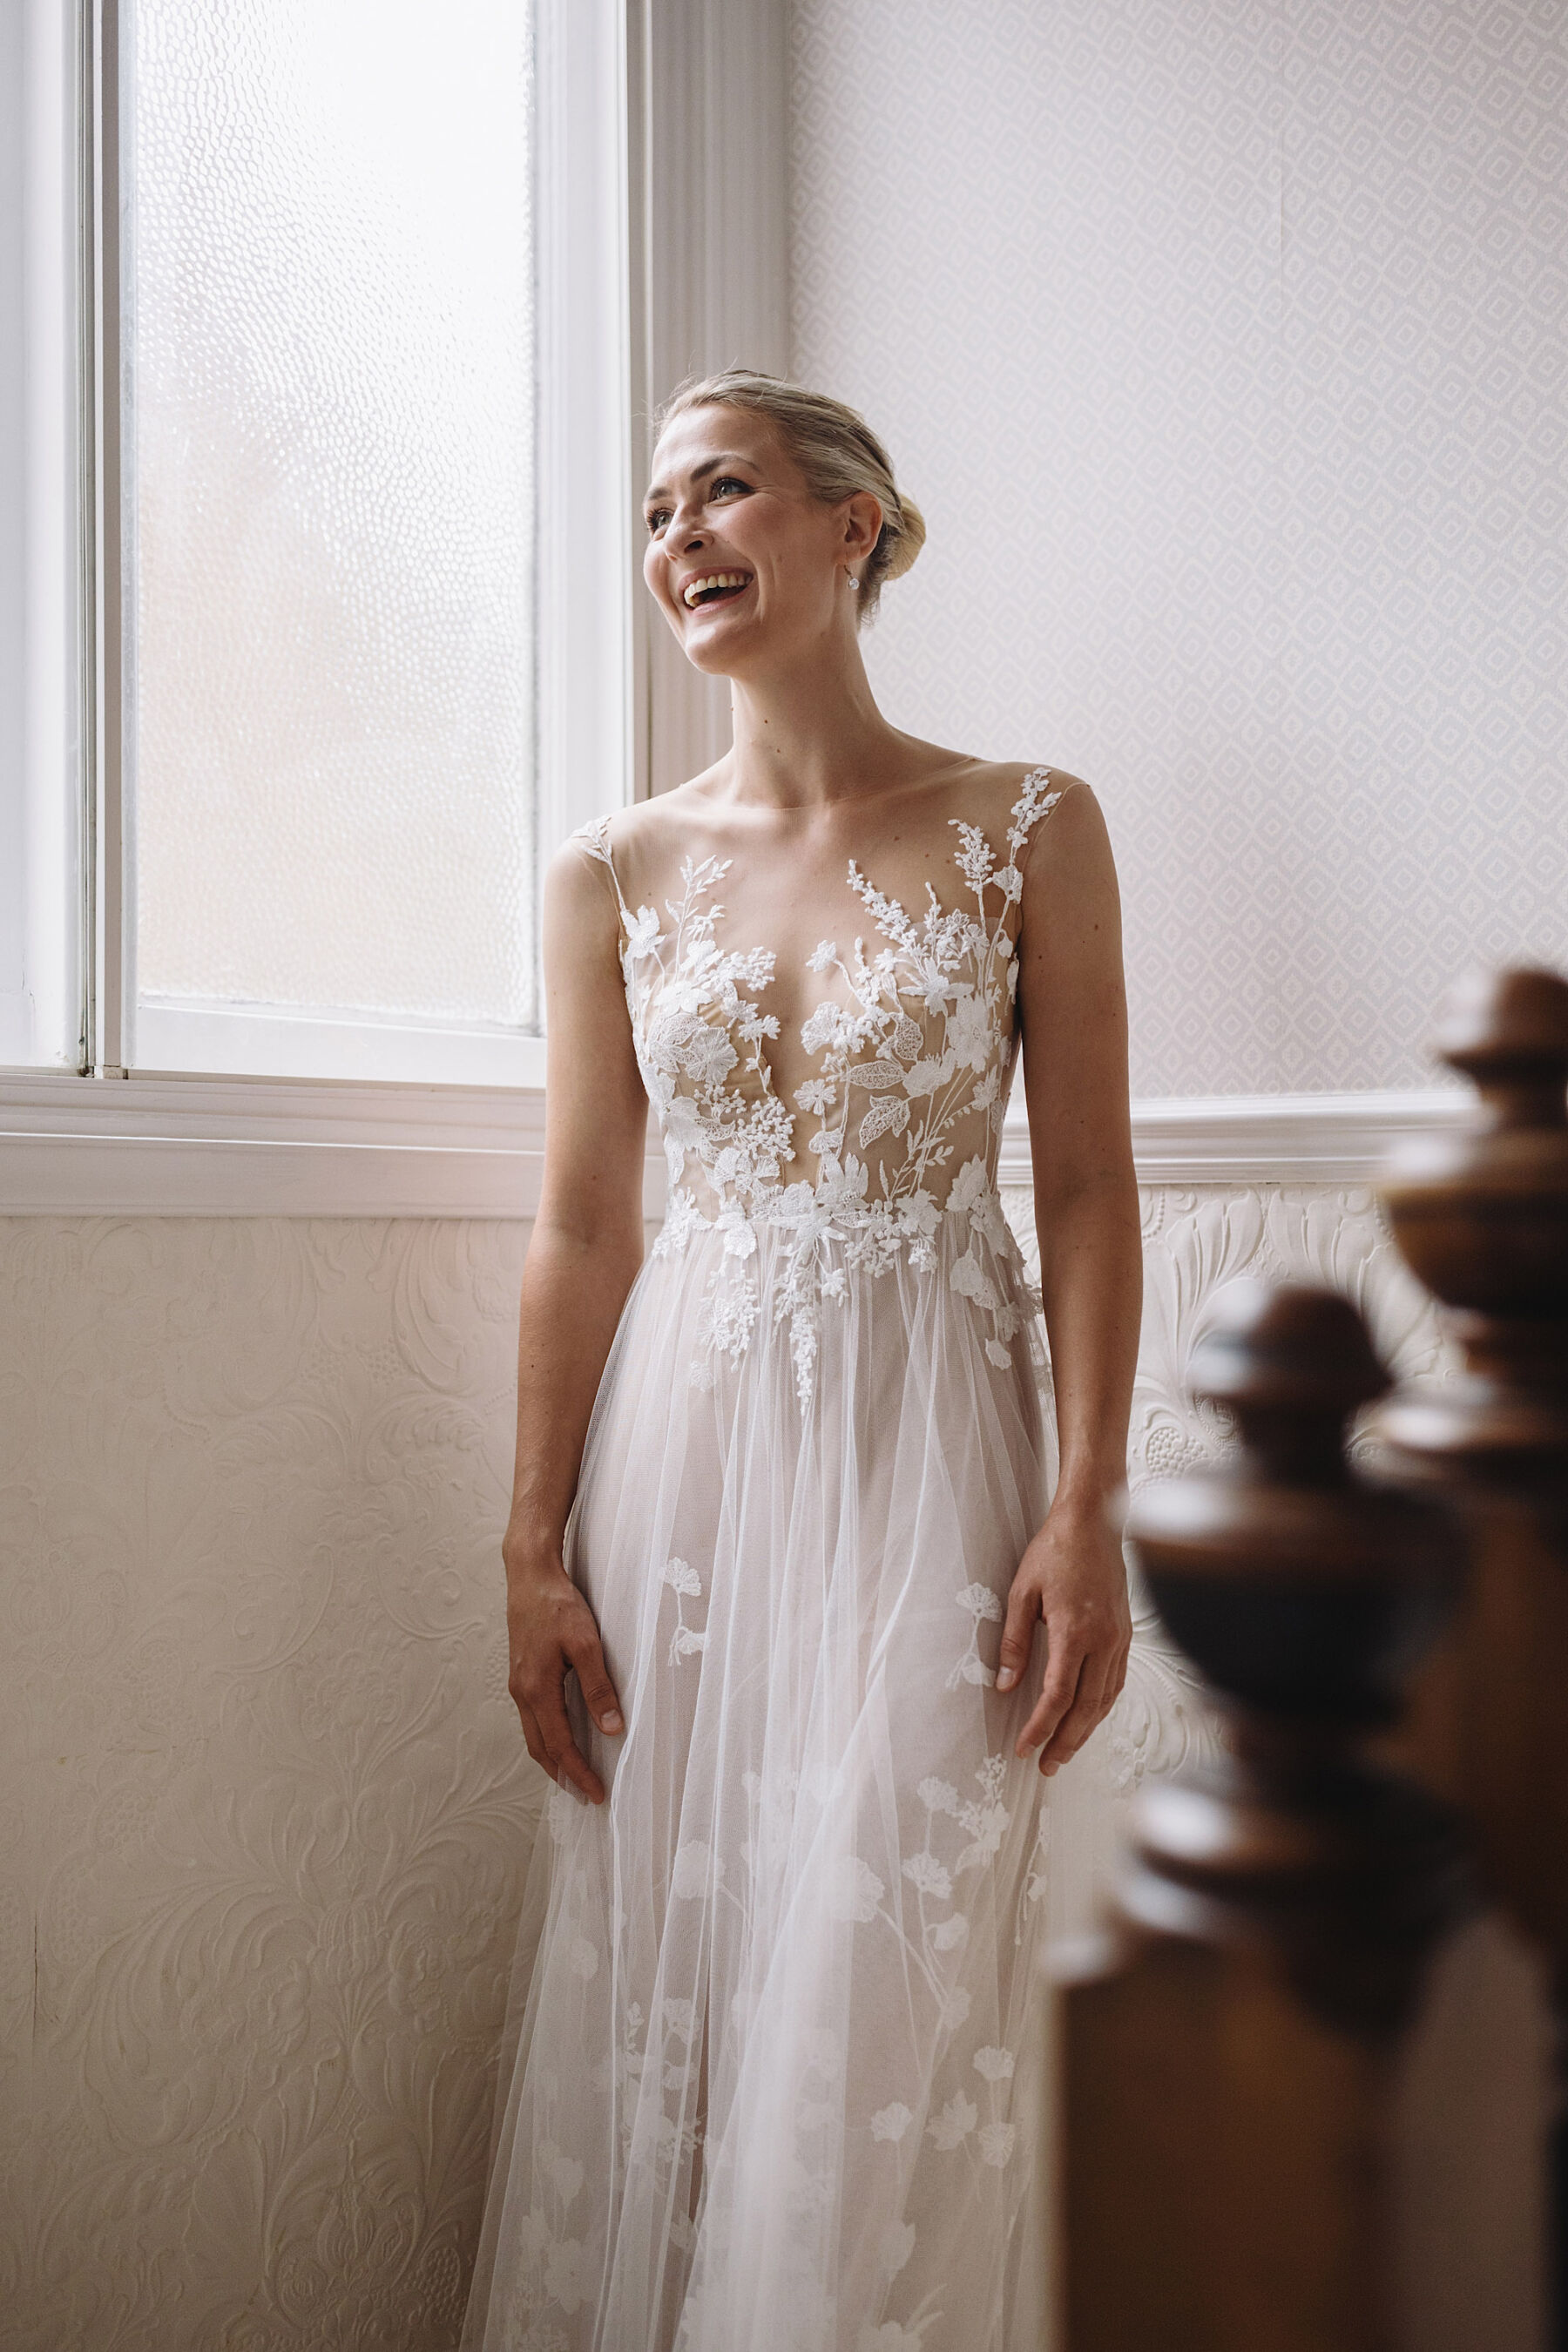 Bride wearing Anna Kara wedding dress with climbing floral lace. Image by Wolf & Co. Photography.